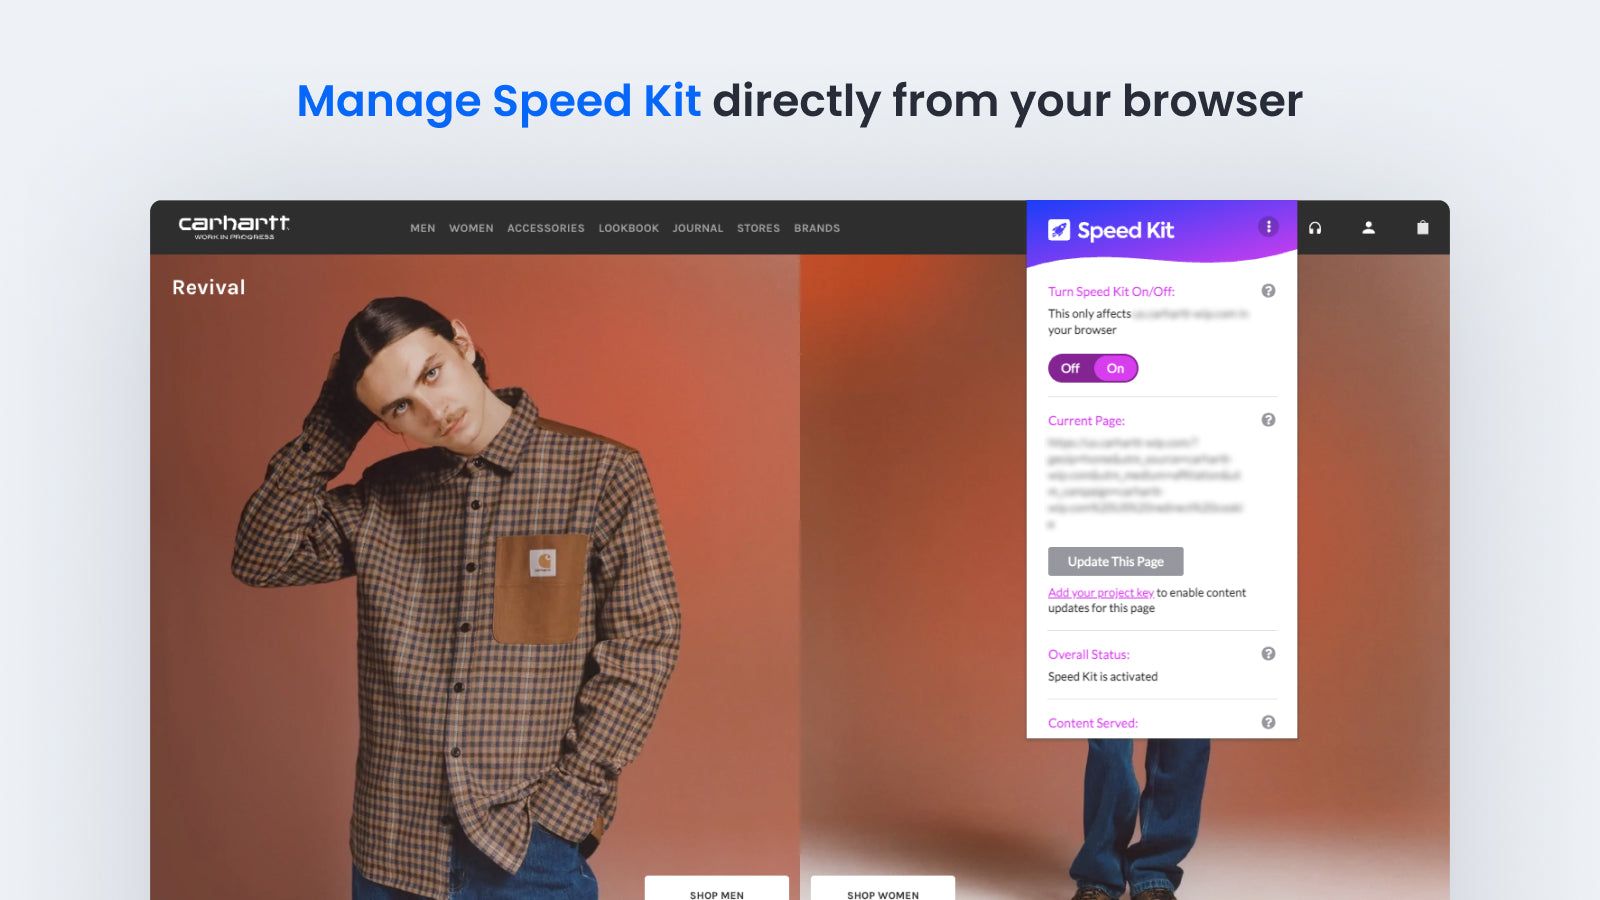 Manage Speed Kit directly from your browser